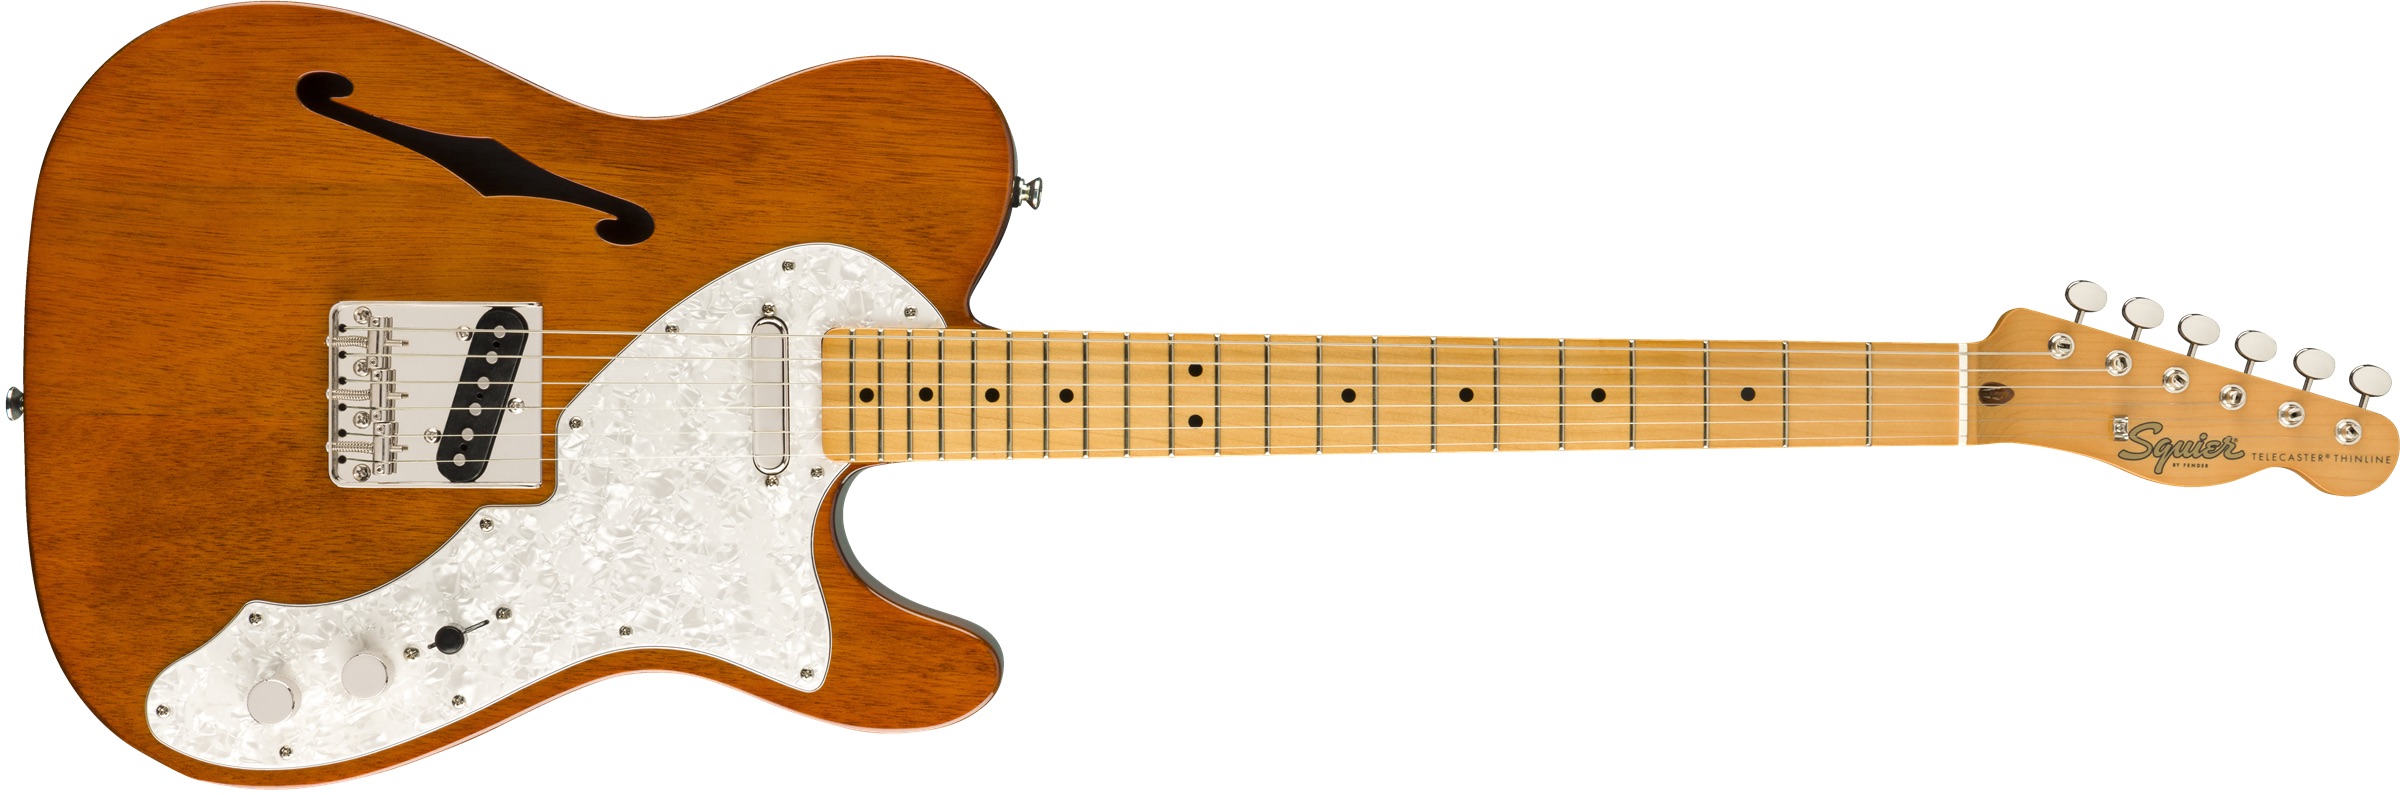 Squier Classic Vibe 60s Telecaster Thinline MN Natural